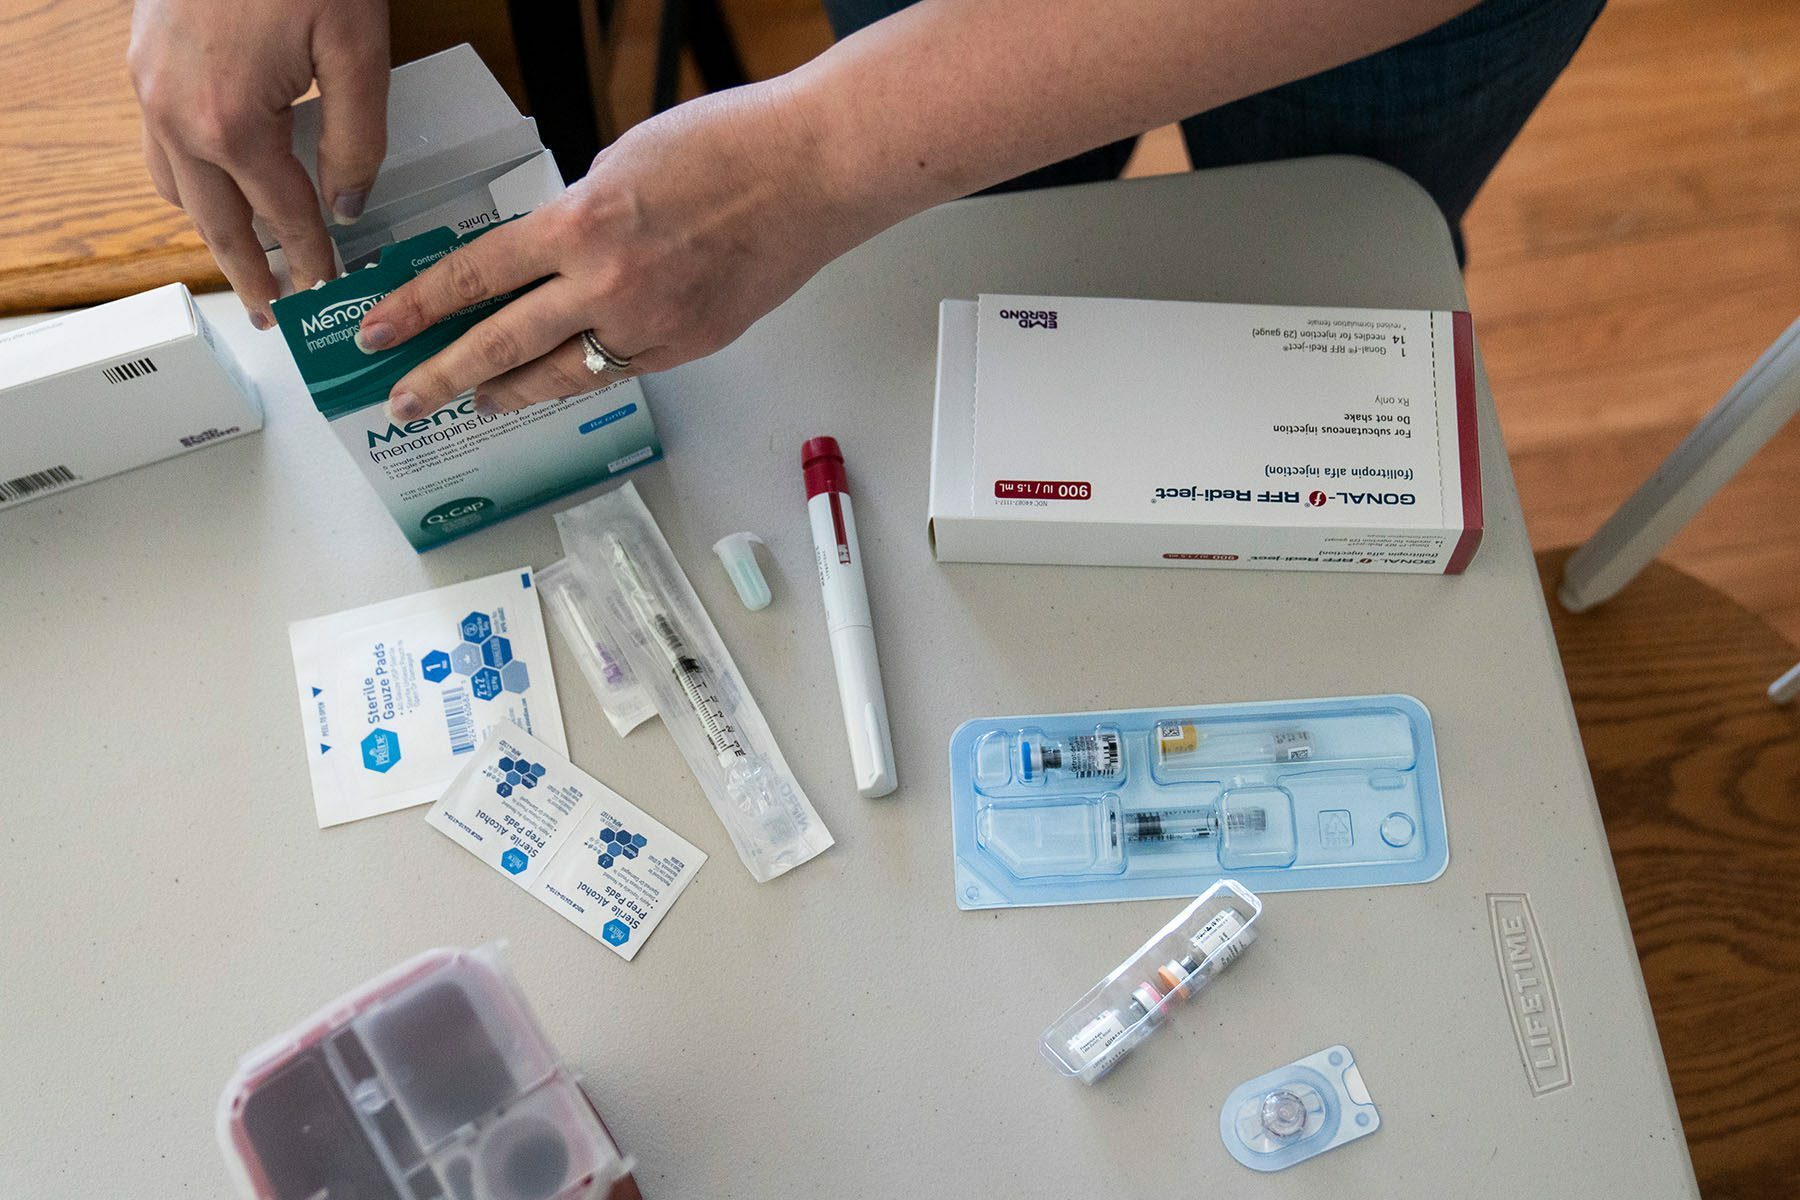 A woman goes through her IVF medications at home. Several boxes of medication and needs are seen on the table.